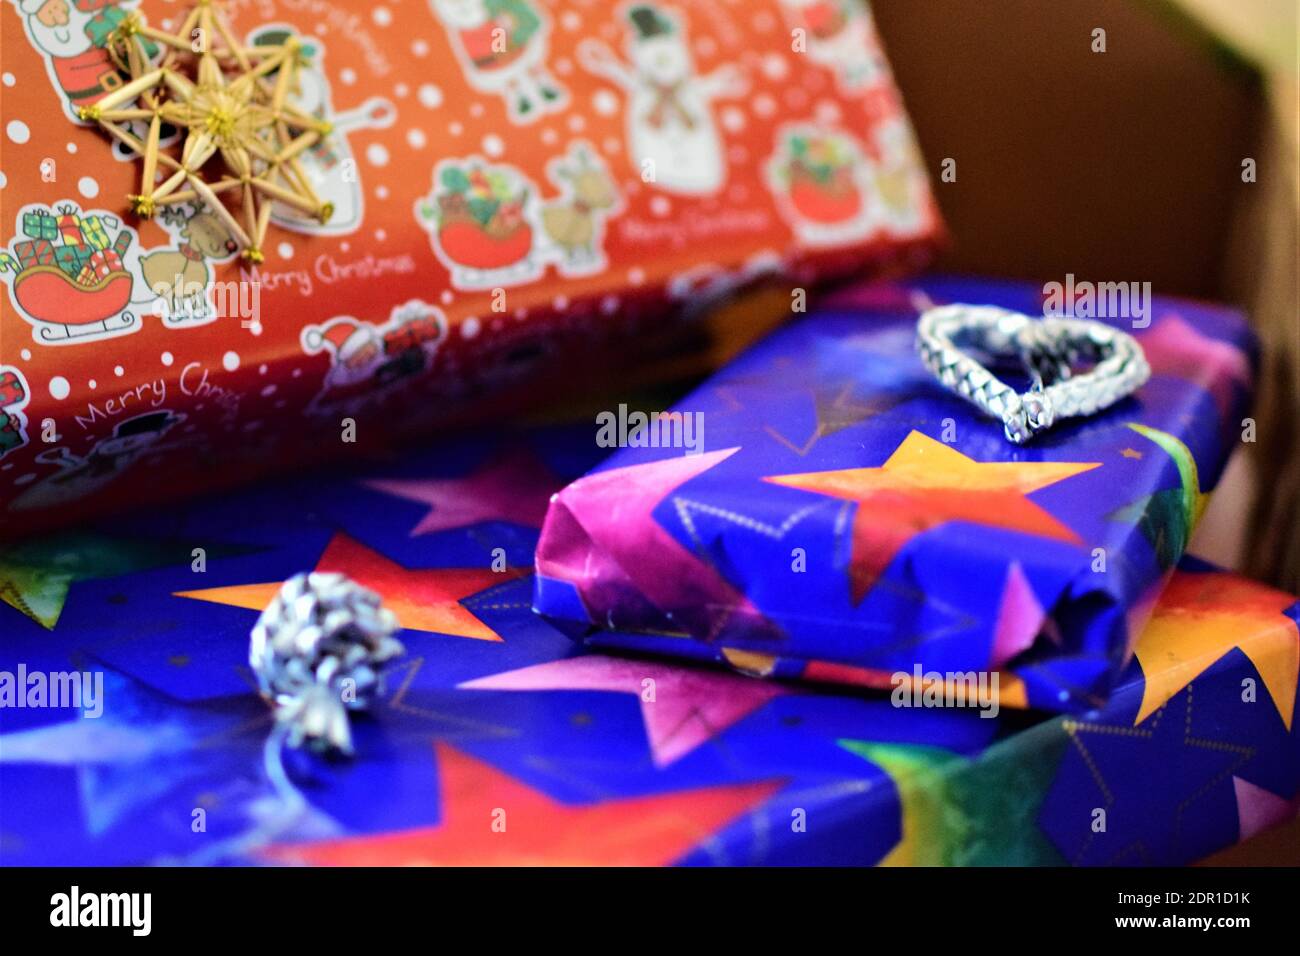 A close up of colorful christmas gifts Stock Photo